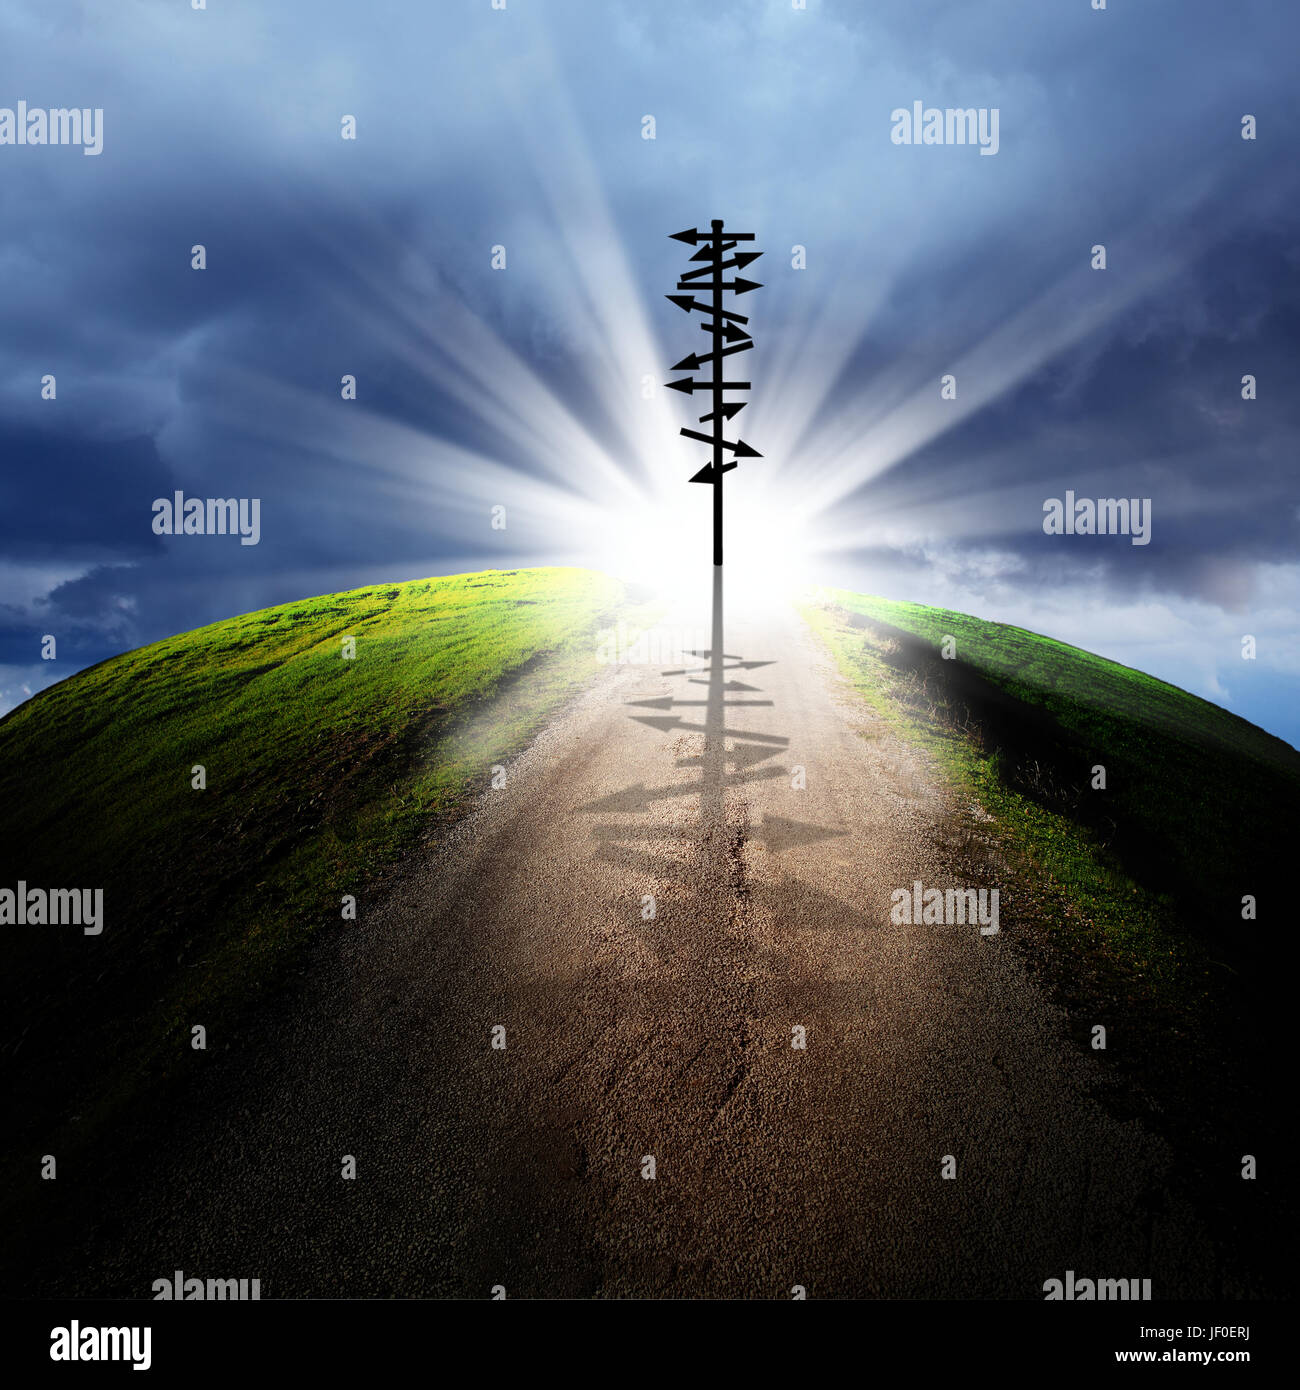 conceptual image of silhouetted directional sign on empty road over cloudy sky with beam of light Stock Photo